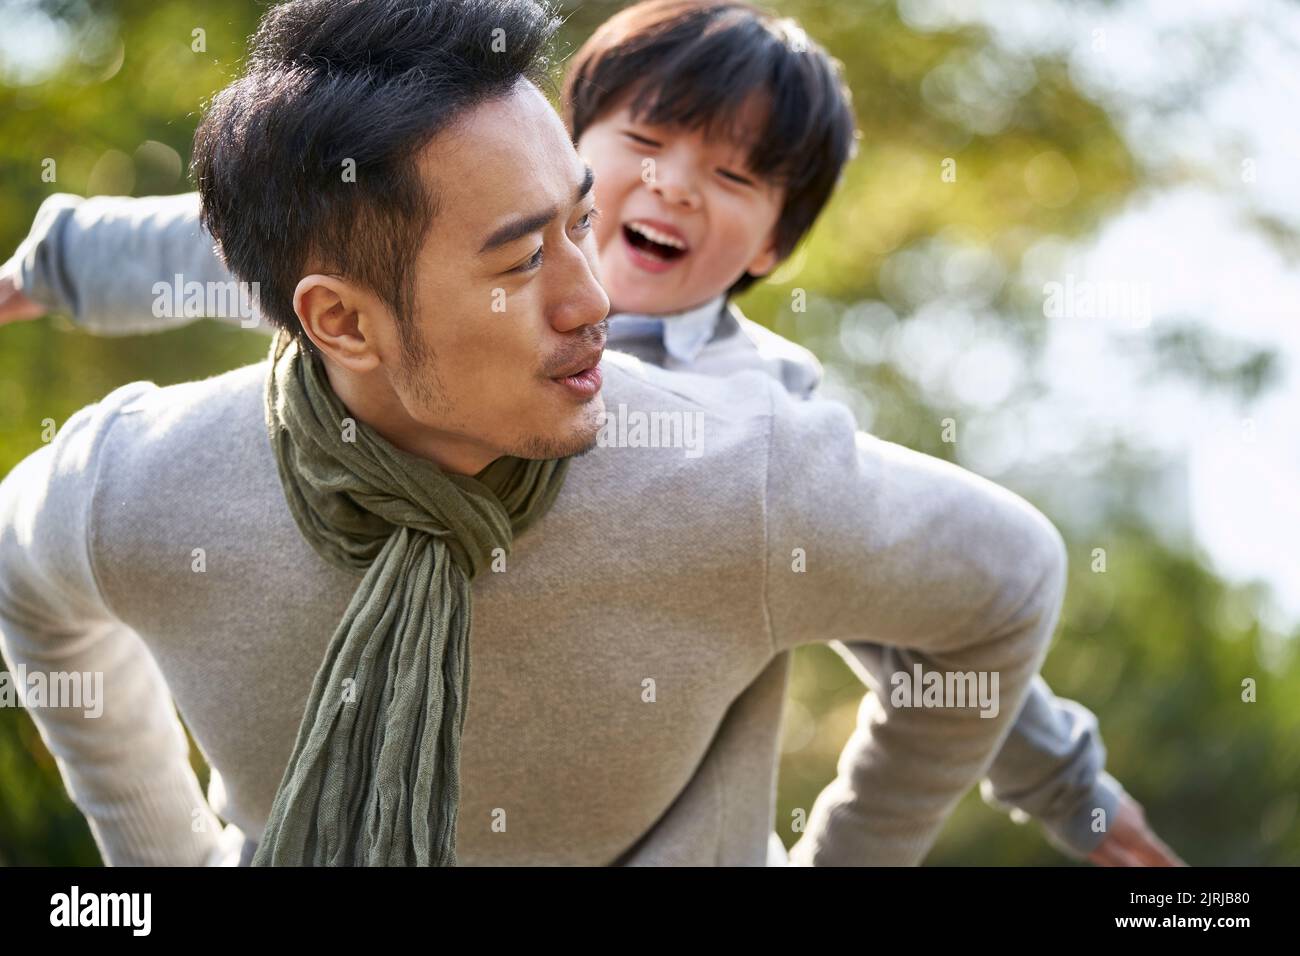 young asian father carrying son on back having fun enjoying nature outdoors in park Stock Photo